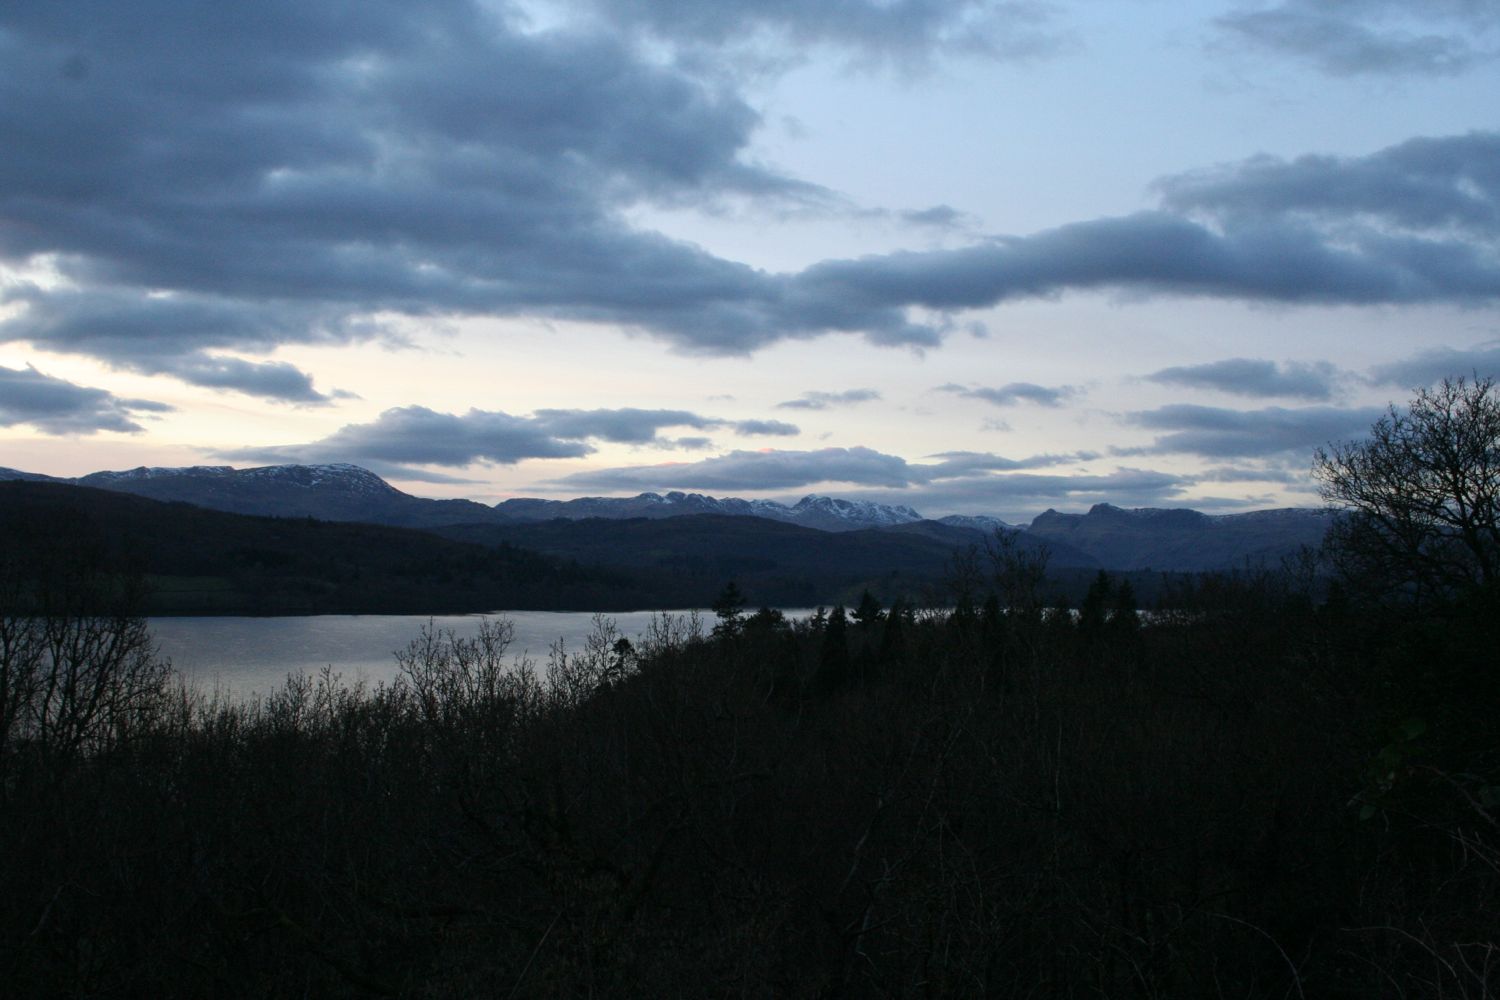 Looking over Windermere at Sunset